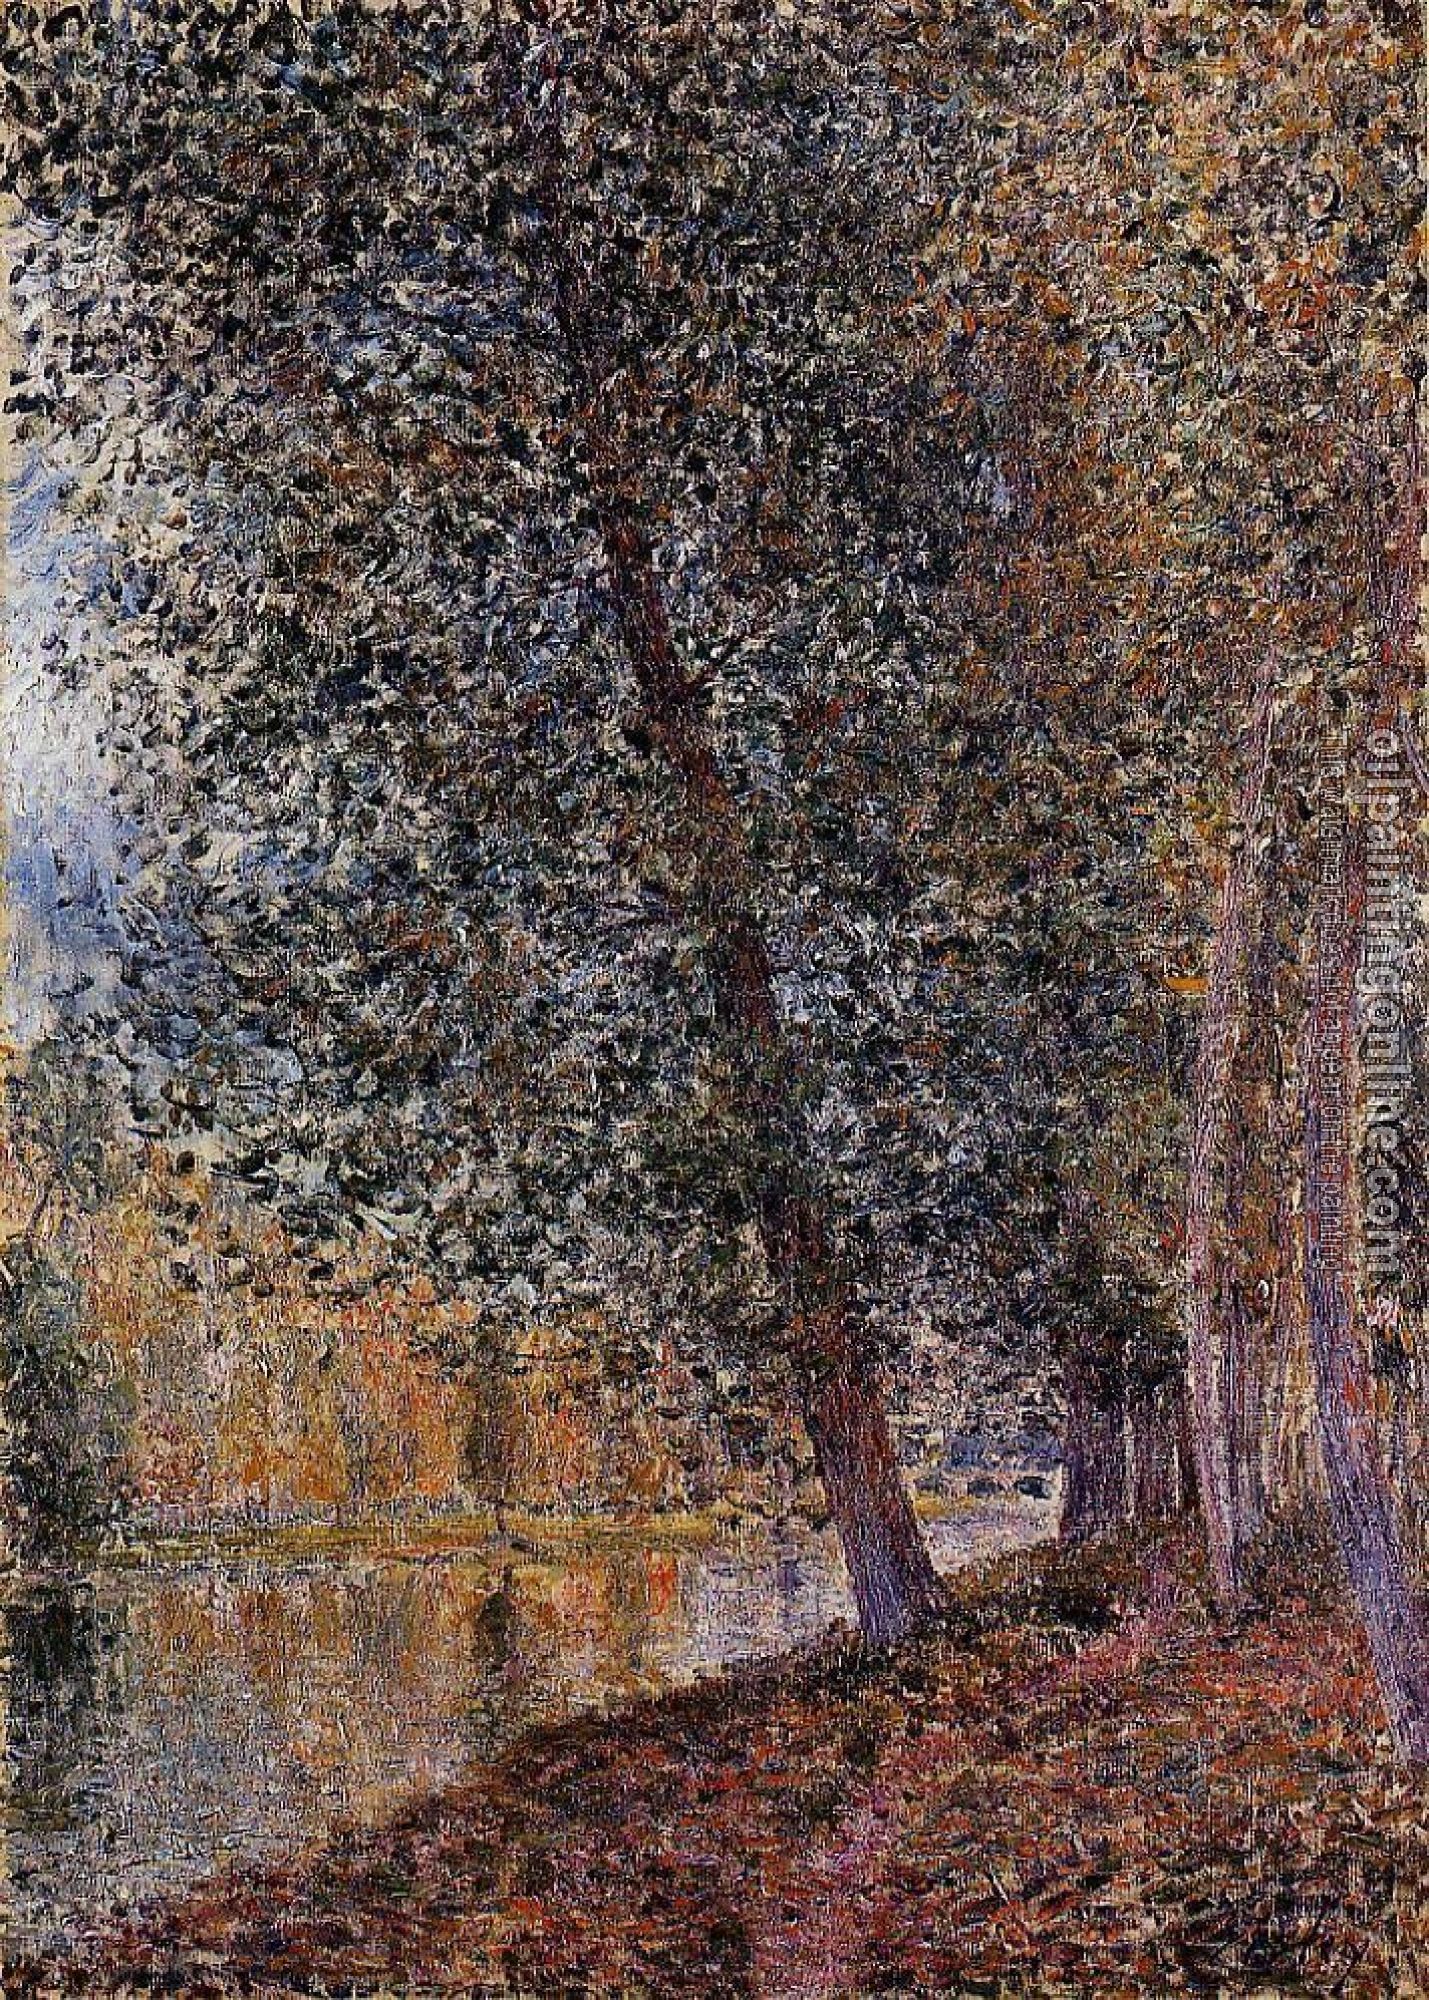 Sisley, Alfred - Banks of the Loing, Autumn